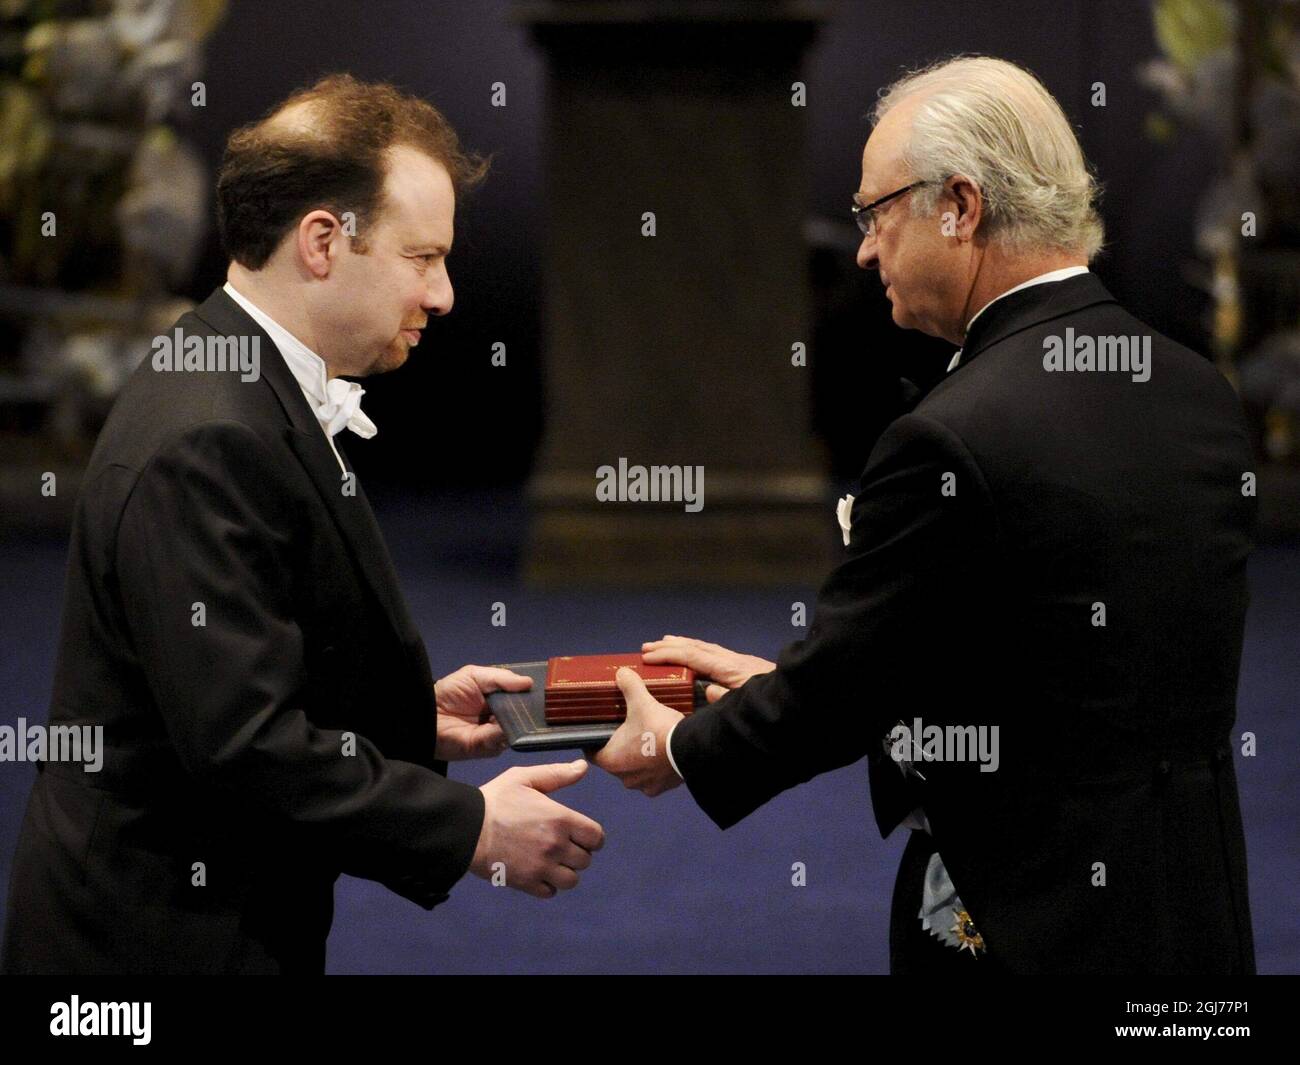 STOCKHOLM 2011-12-10  Professor Adam G. Riess of the Johns Hopkins University, Baltimore, MD, USA, Space Telescope Science Institute, Baltimore, MD, USA is awarded the Nobel Prize in Physics 2011 by King Carl Gustaf of Sweden during the Nobel award ceremony in the Concert Hall of Stockholm Sweden, December 10, 2011.  Professor Riess, received the award for”the discovery of the accelerating expansion of the Universe through observations of distant supernovae'  Foto: Anders Wiklund / SCANPIX  kod 10040 Stock Photo